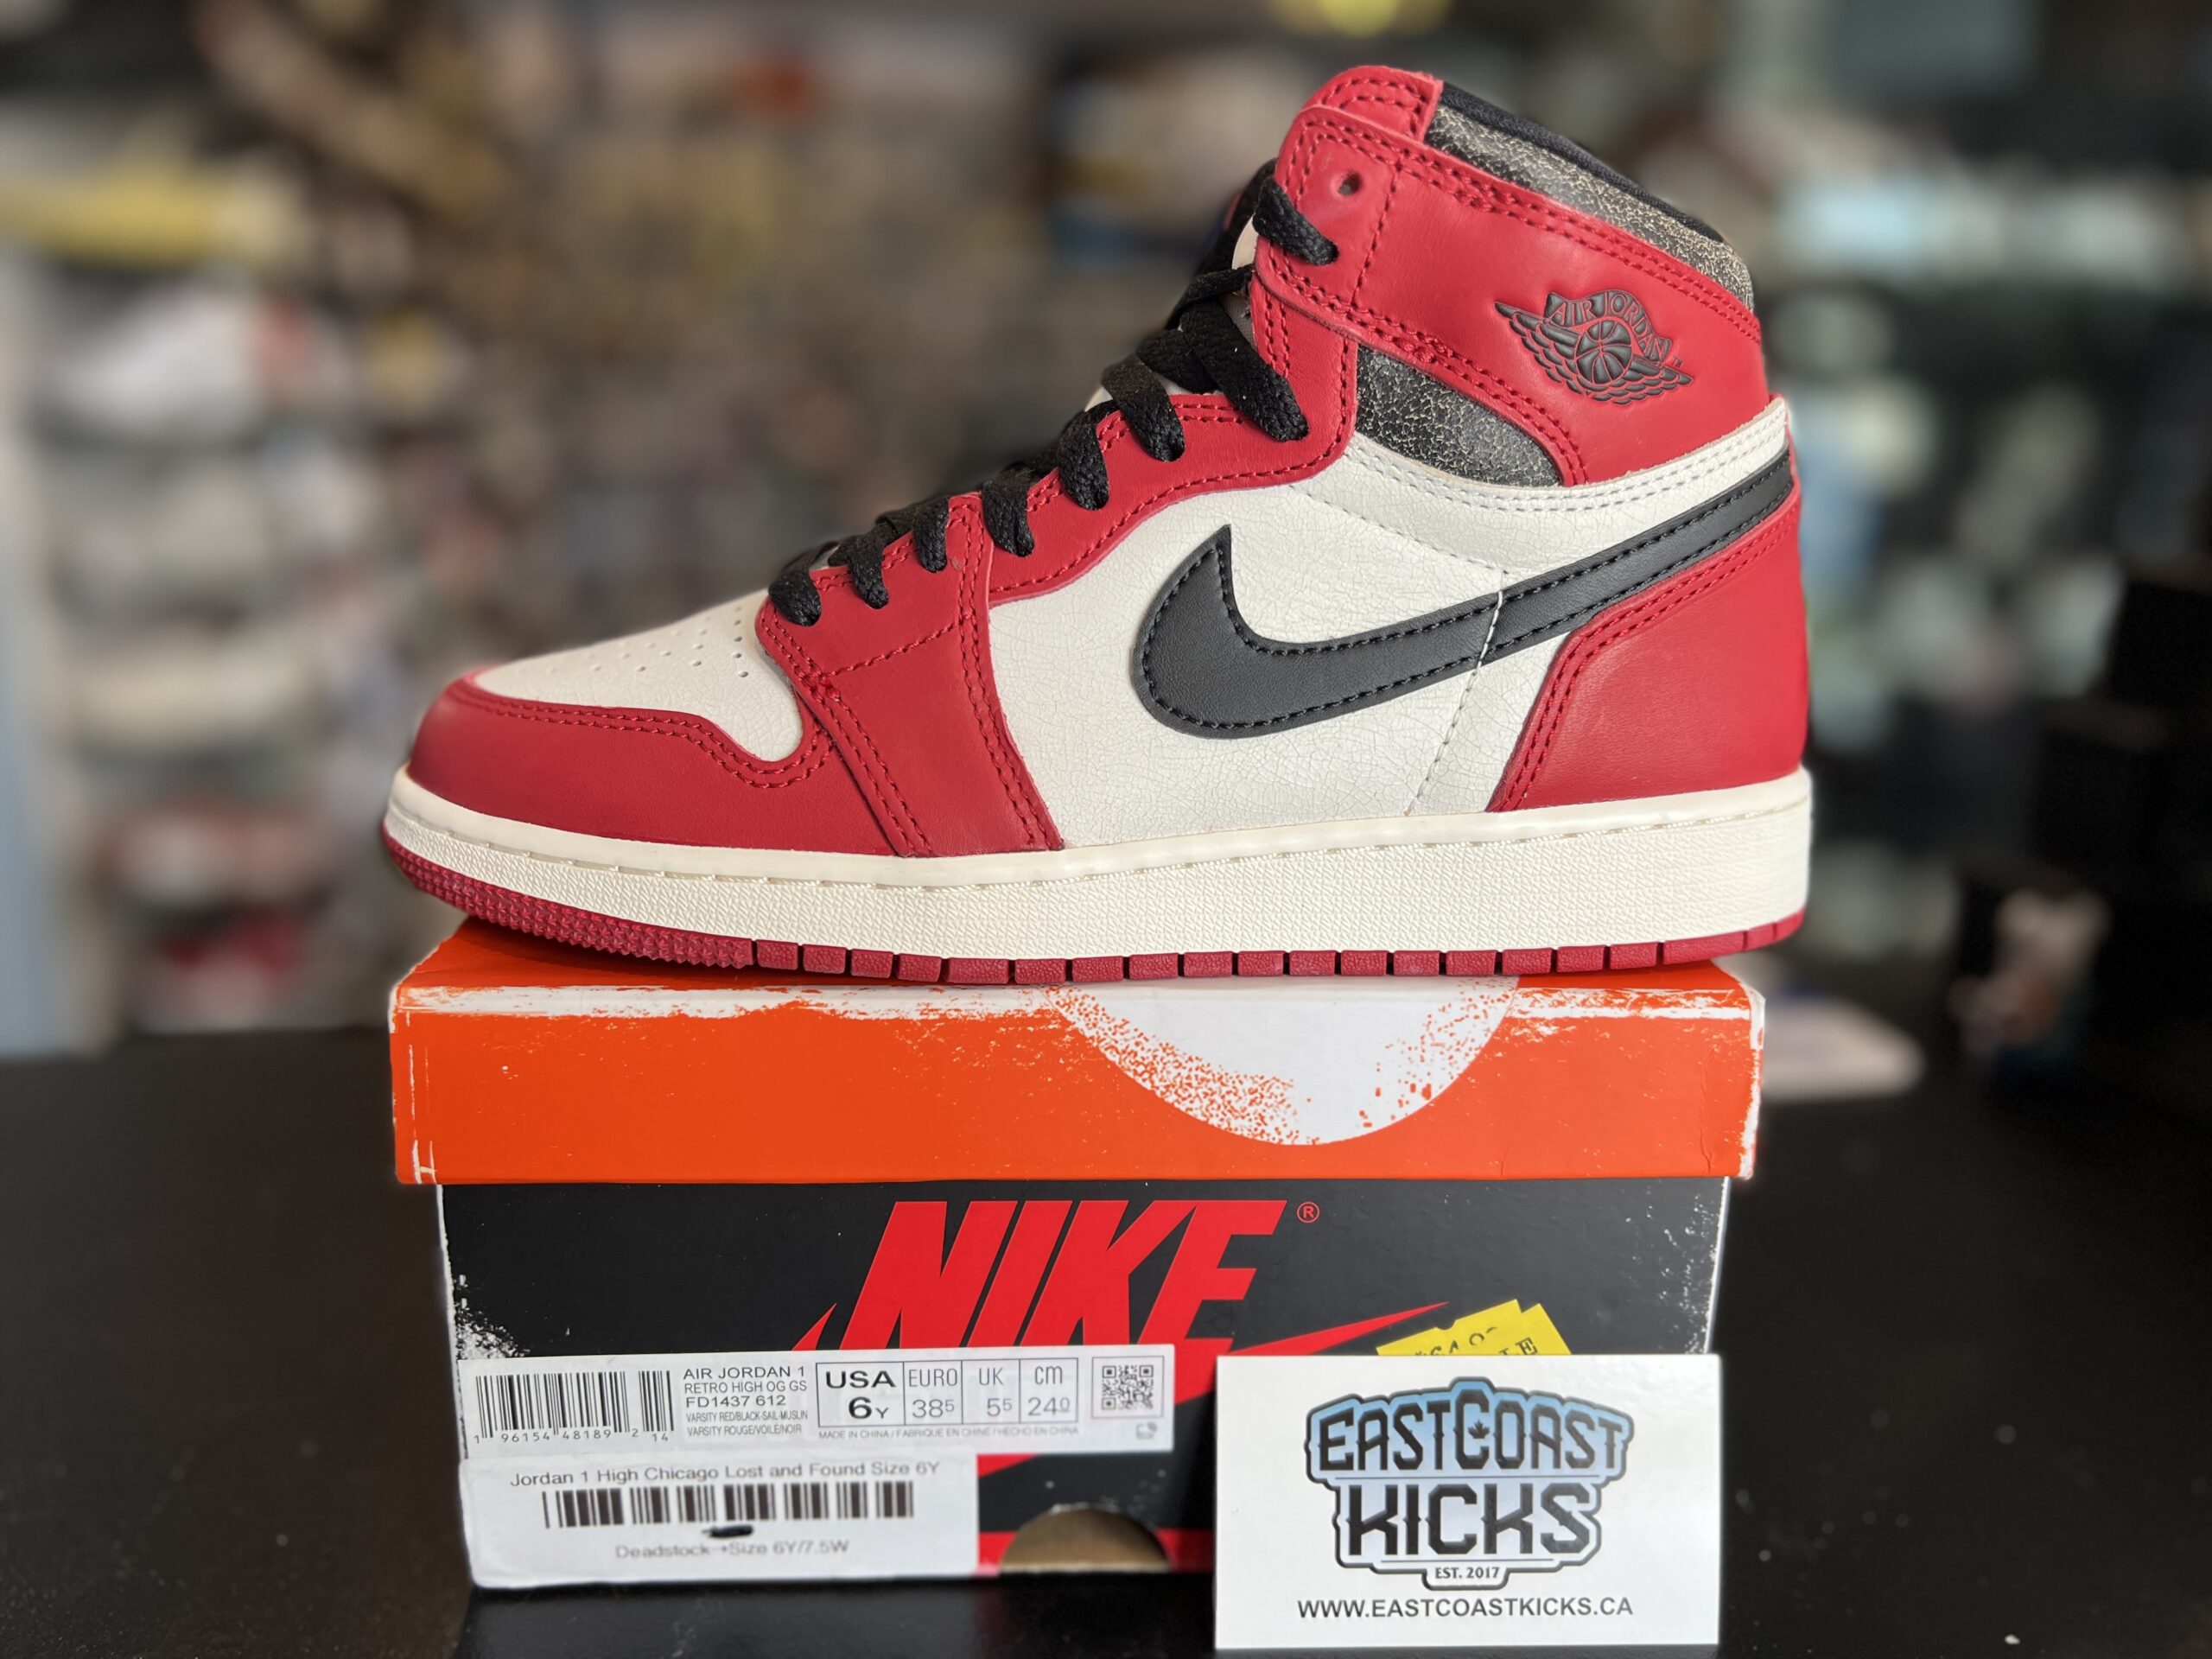 Jordan 1 Retro High OG Chicago Lost and Found Size 6Y